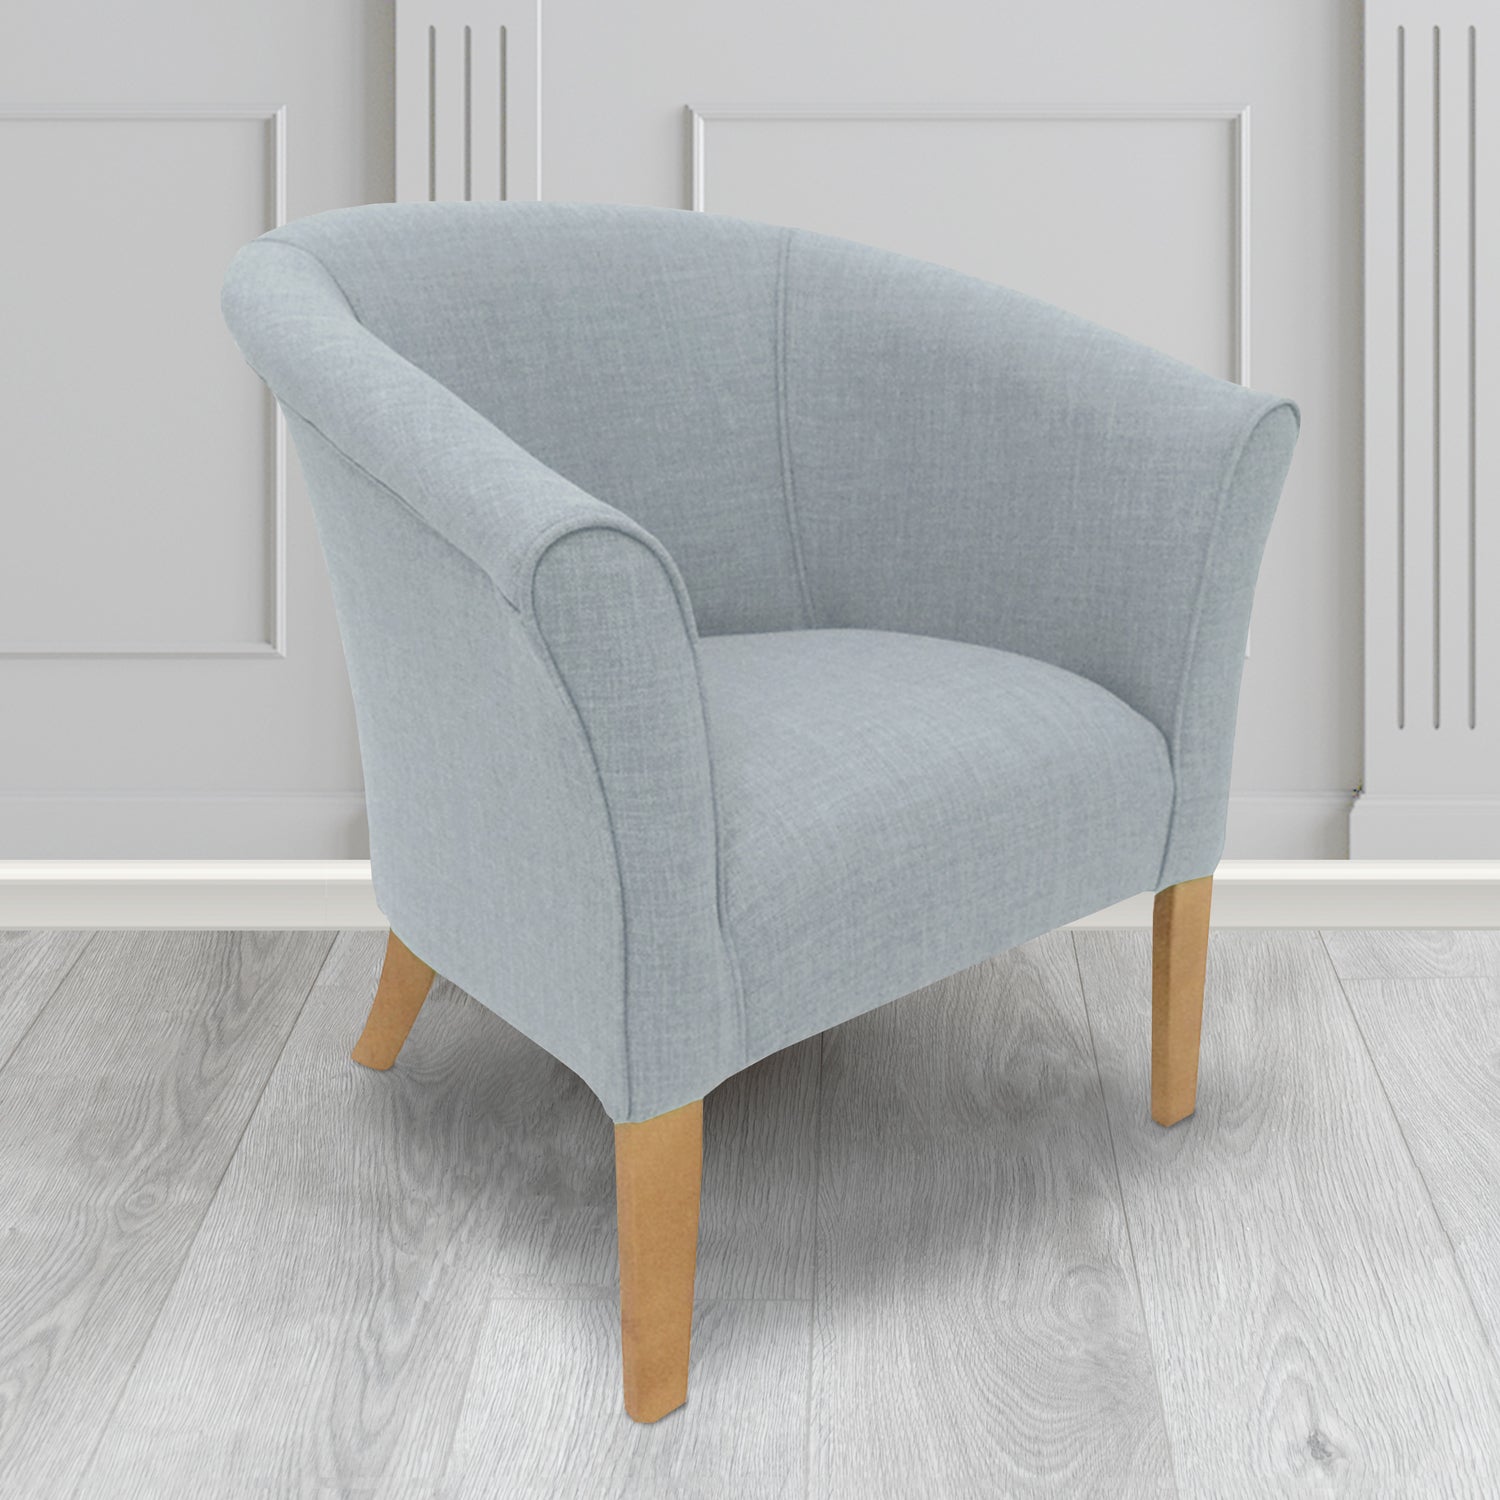 Quill Tub Chair in Linetta Light Blue Crib 5 Plain Fabric - Antimicrobial, Stain Resistant & Waterproof - The Tub Chair Shop